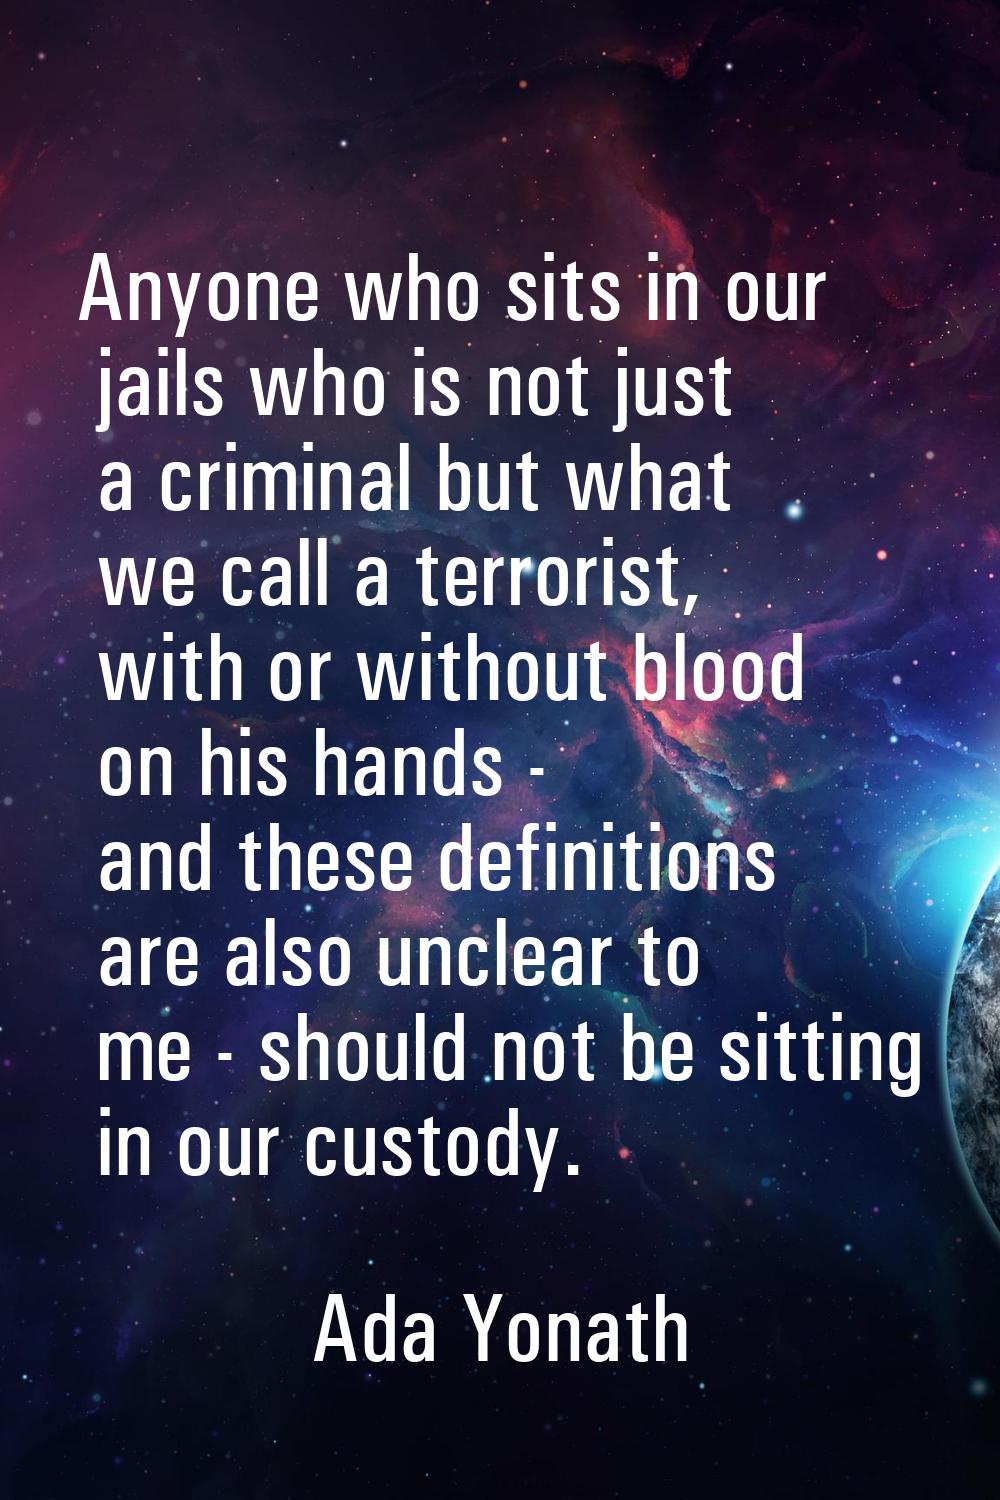 Anyone who sits in our jails who is not just a criminal but what we call a terrorist, with or witho